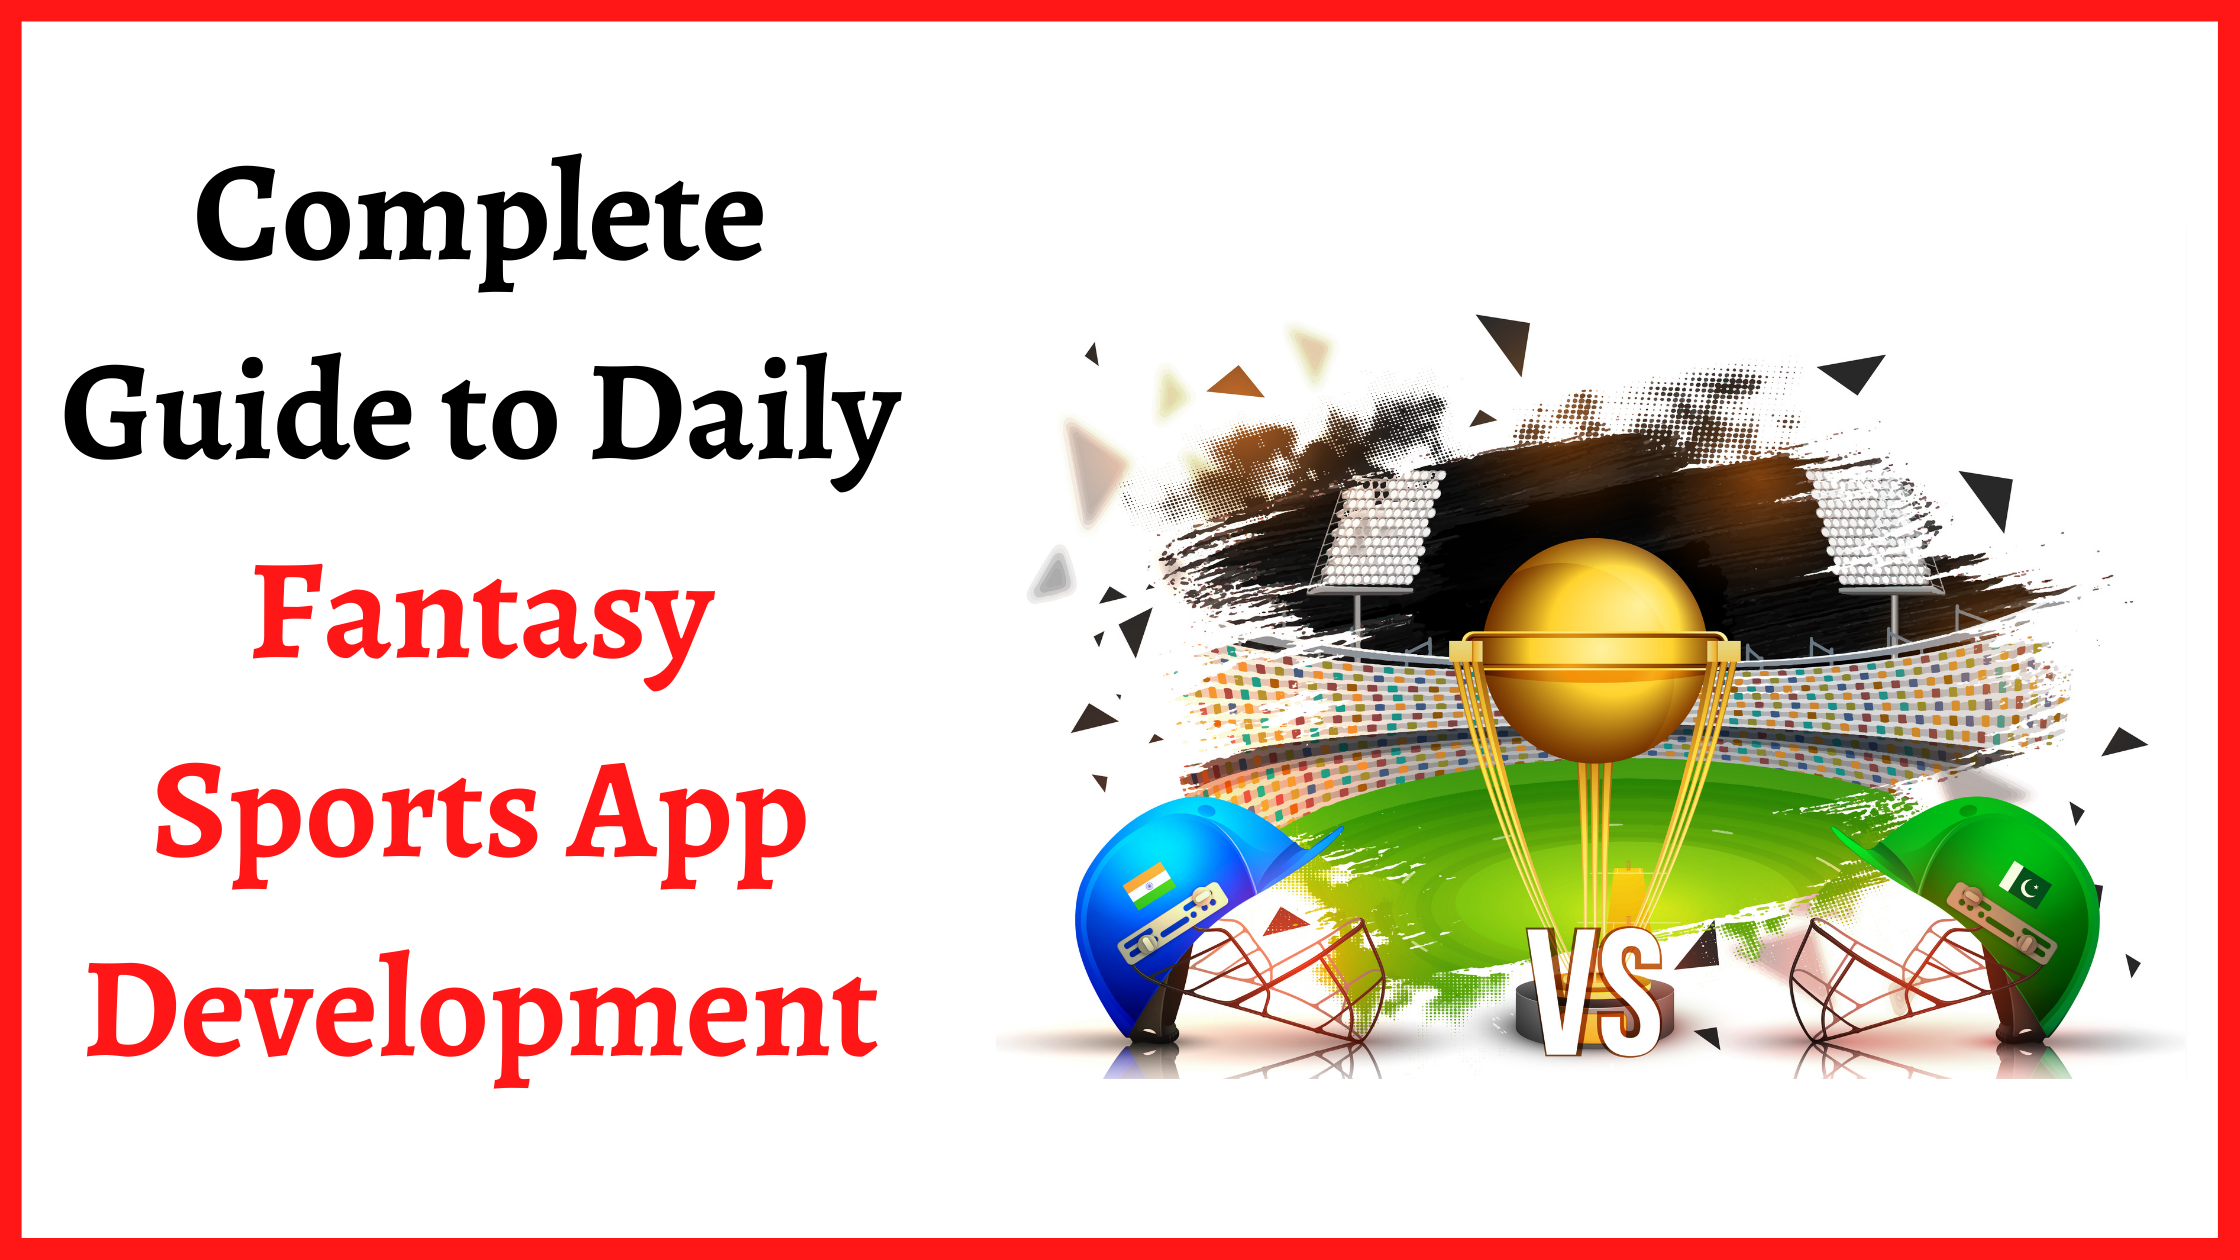 Complete Guide to Daily Fantasy Sports App Development